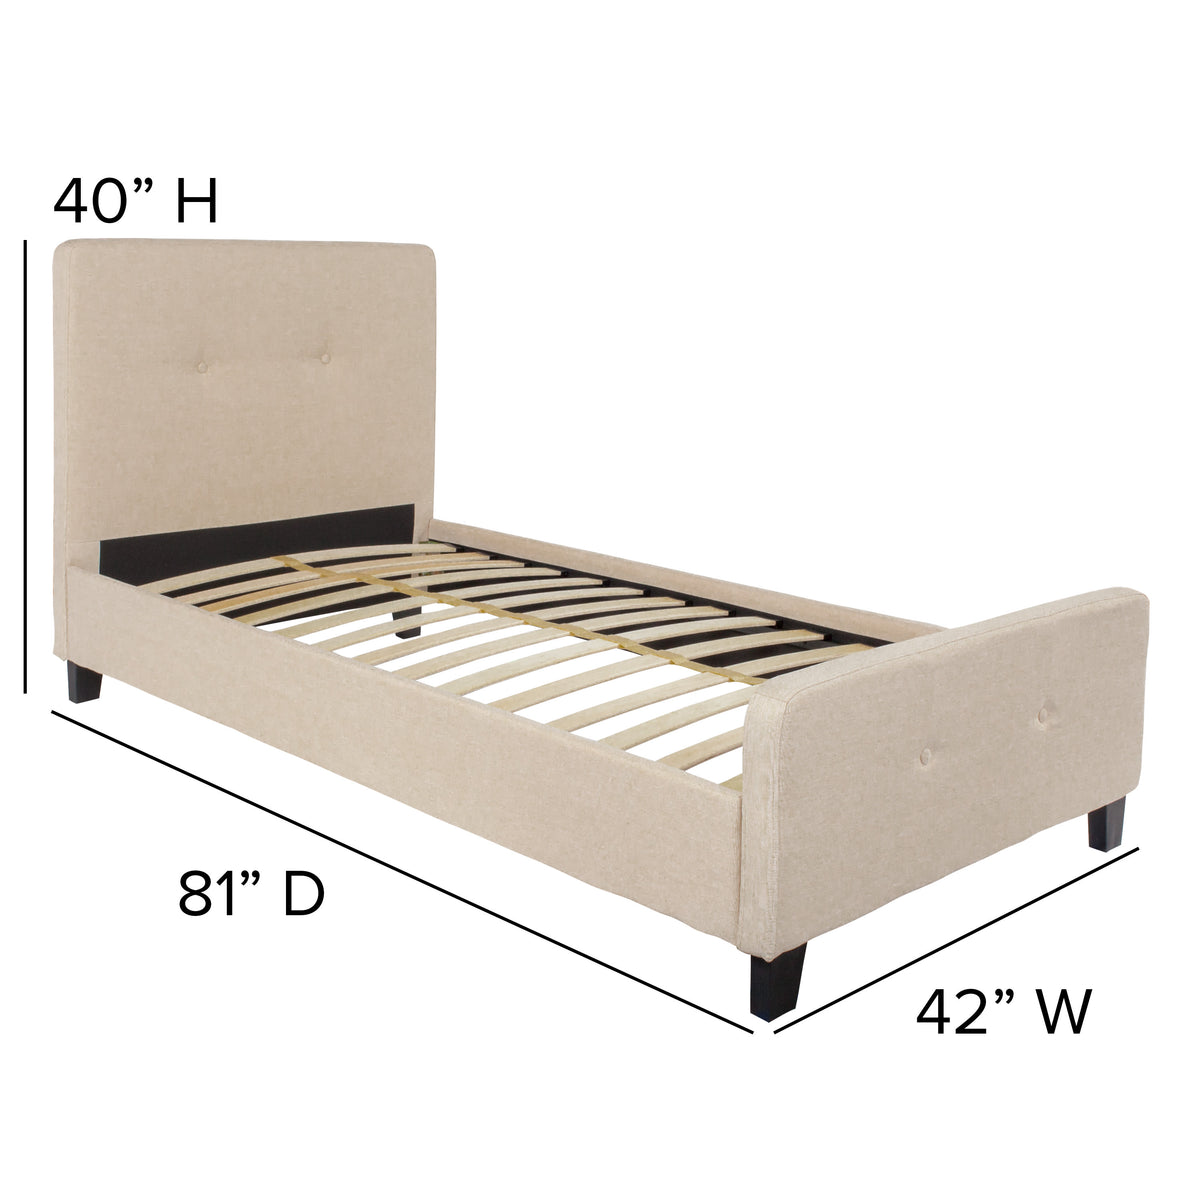 Beige,Twin |#| Twin Size Two Button Tufted Upholstered Platform Bed in Beige Fabric